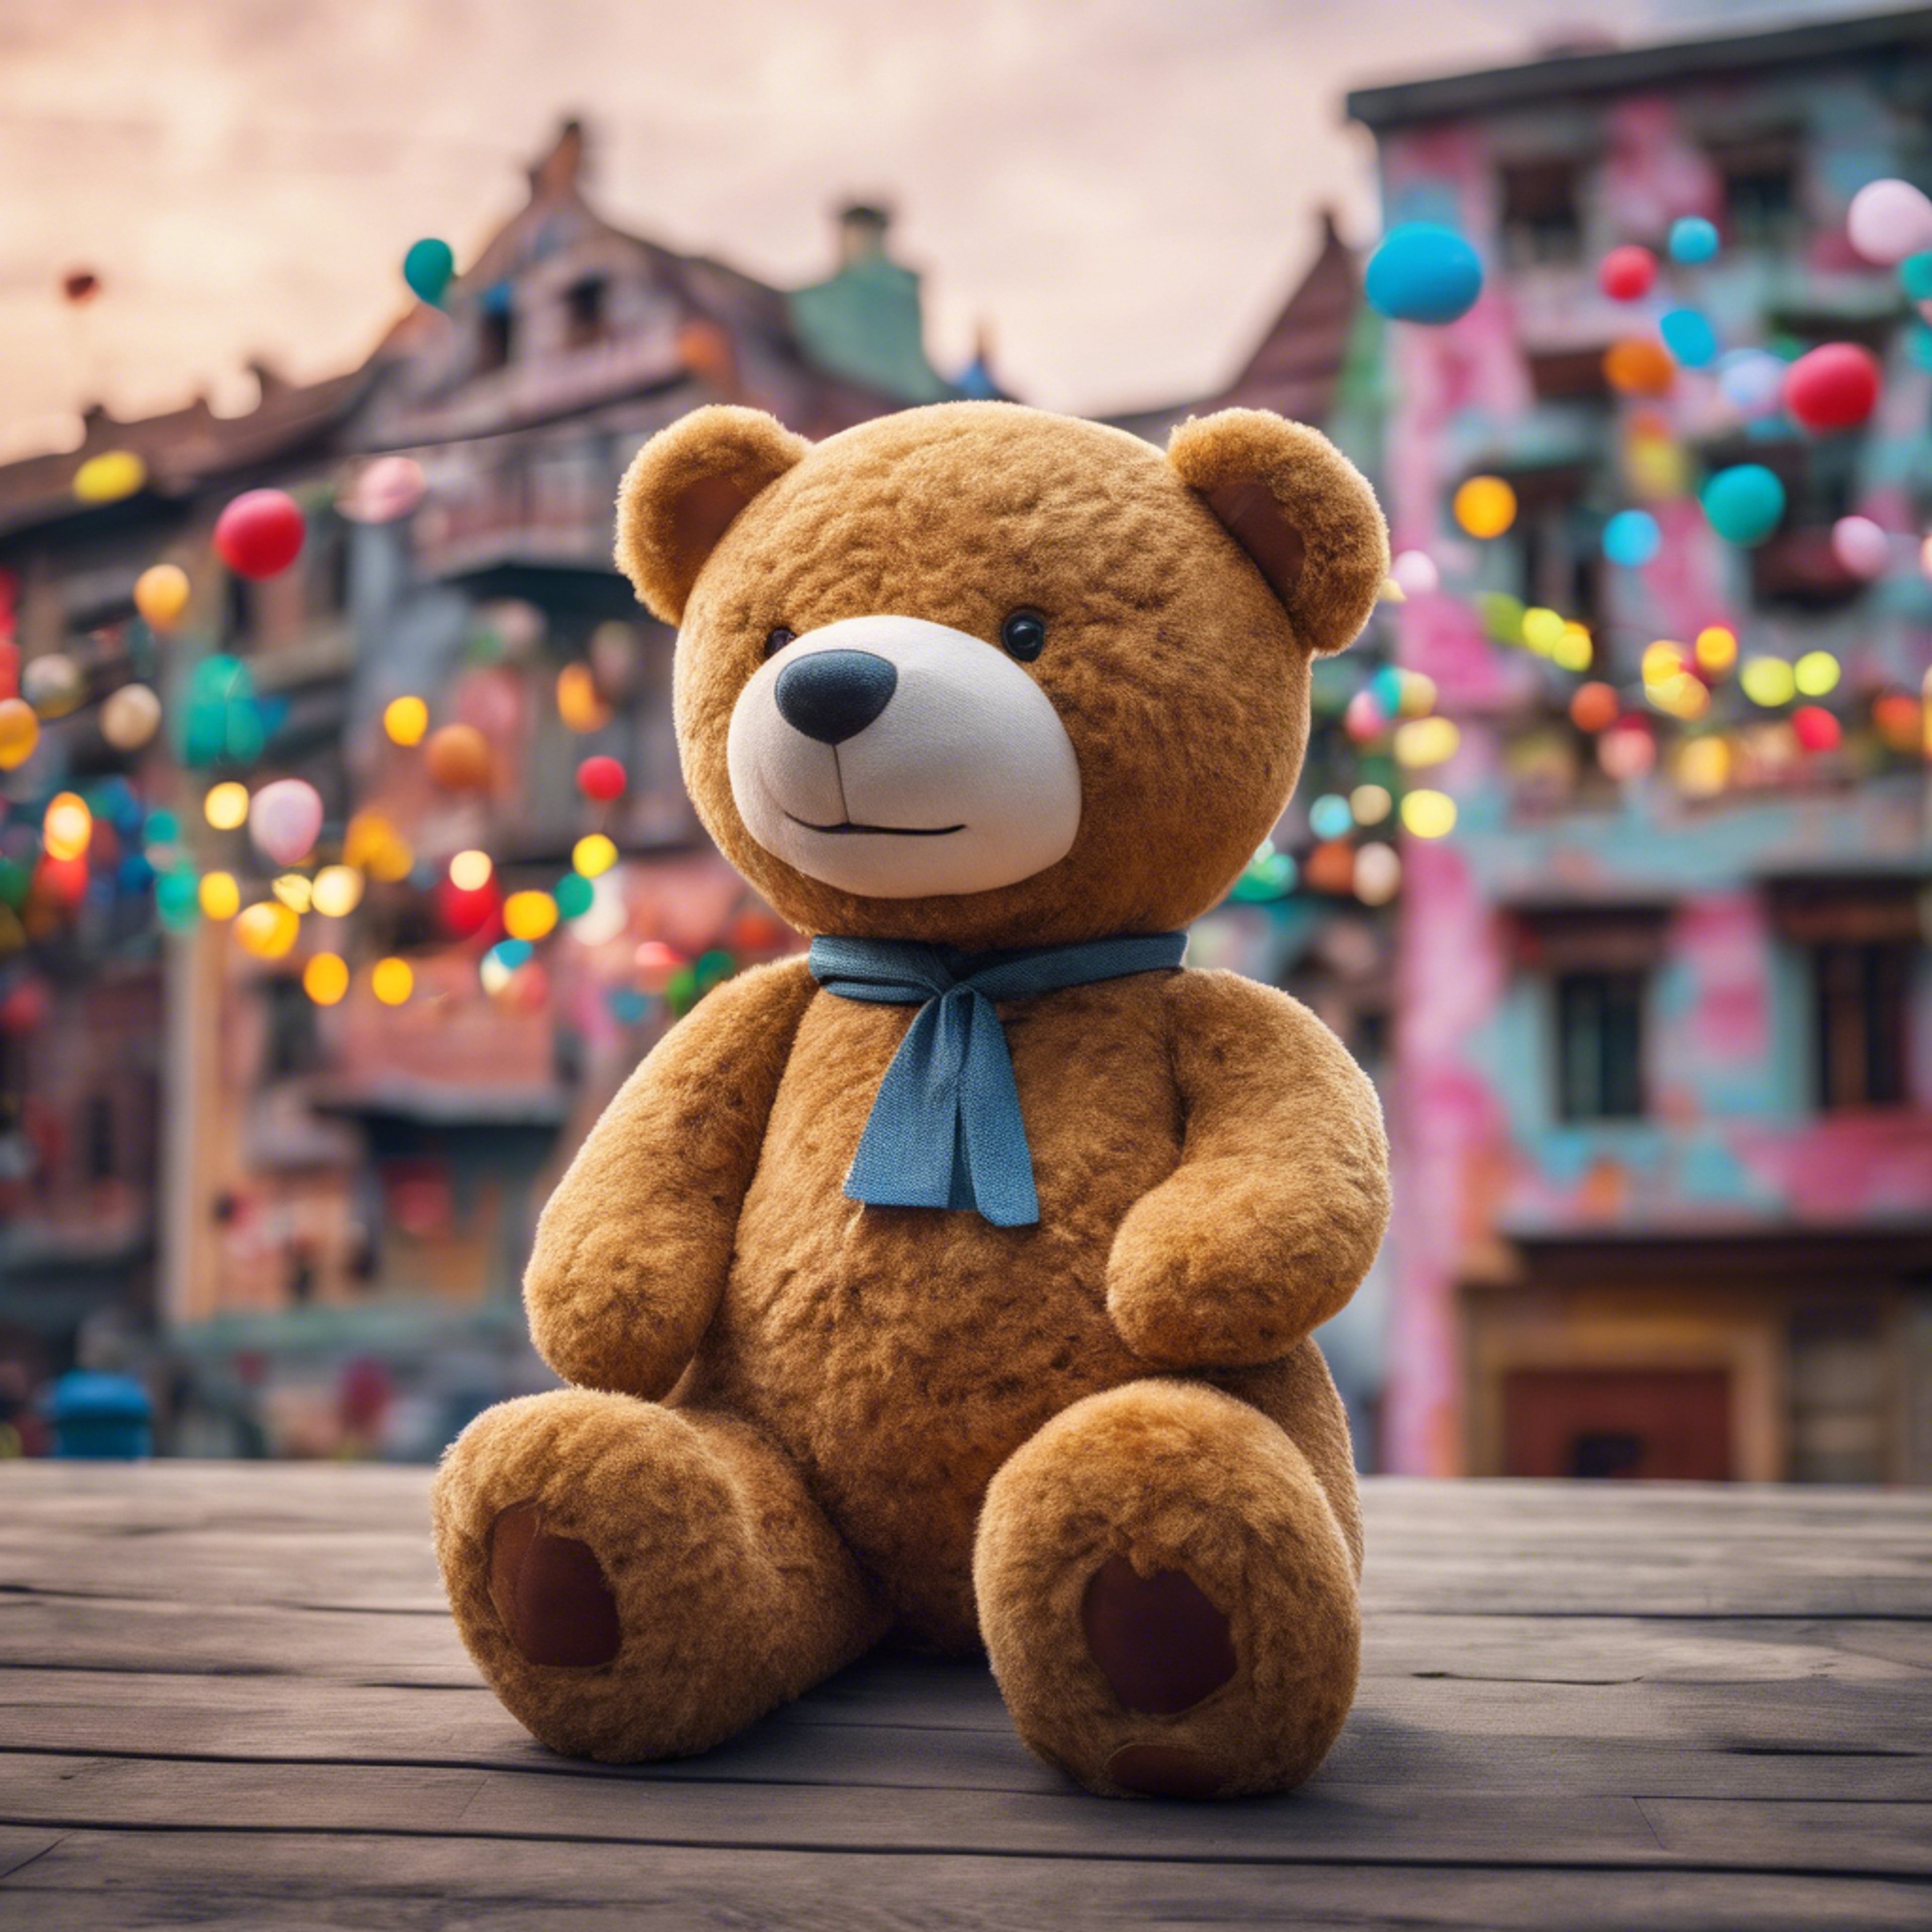 A giant teddy bear watching over a playful and colorful dream town. Tapetai[2720b550e885450daa82]